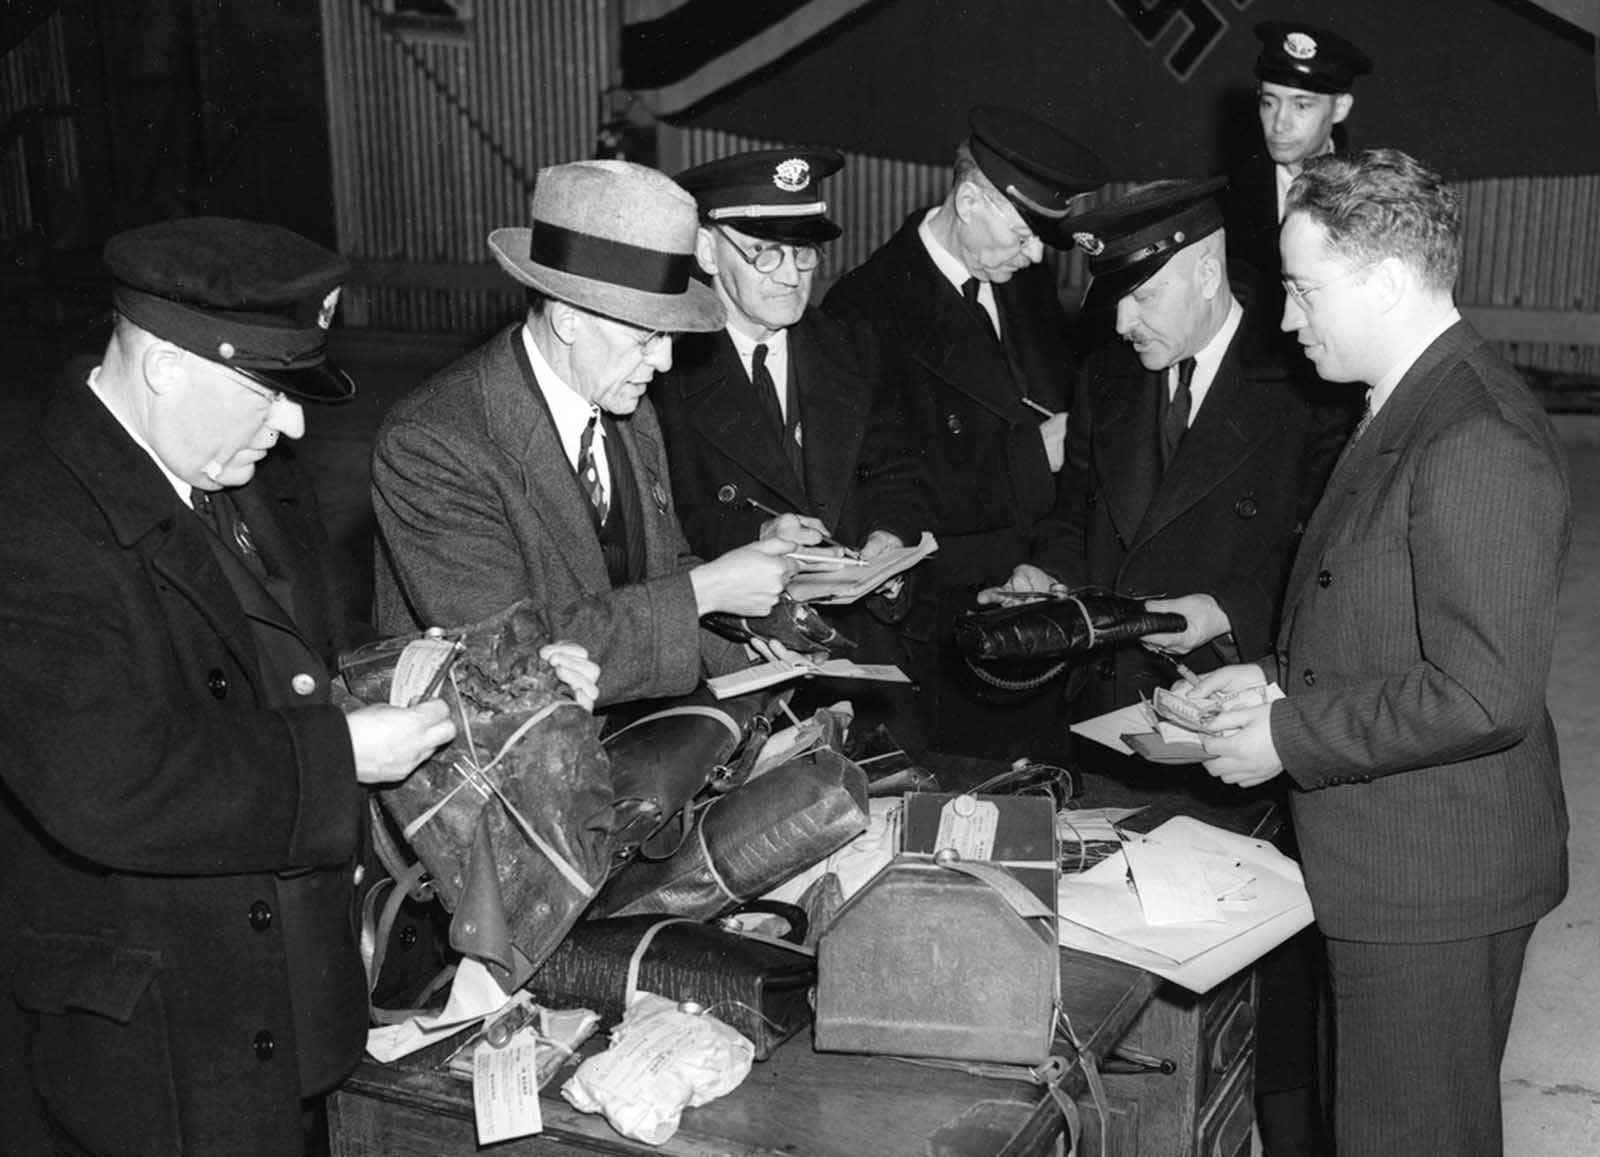 Customs officers search through baggage items salvaged in the Hindenburg explosion in Lakehurst, New Jersey, May 6, 1937.